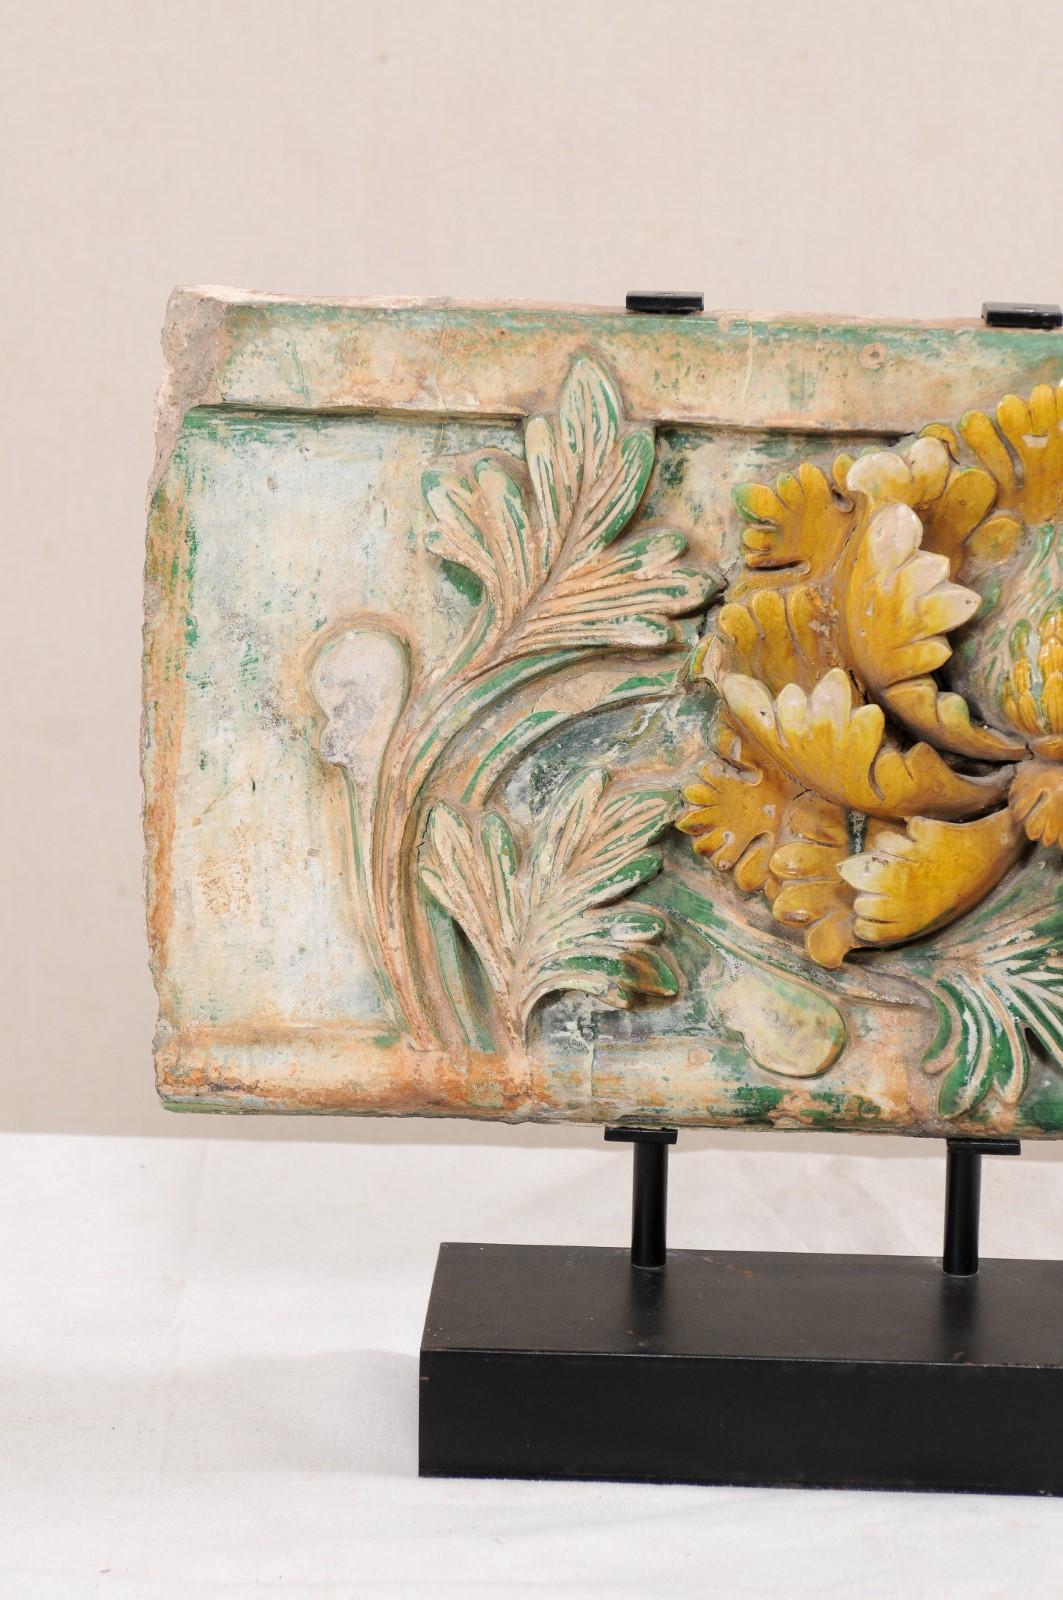 19th Century Chinese Glazed Terracotta Temple Fragment '19th C or Older' on Custom Iron Stand